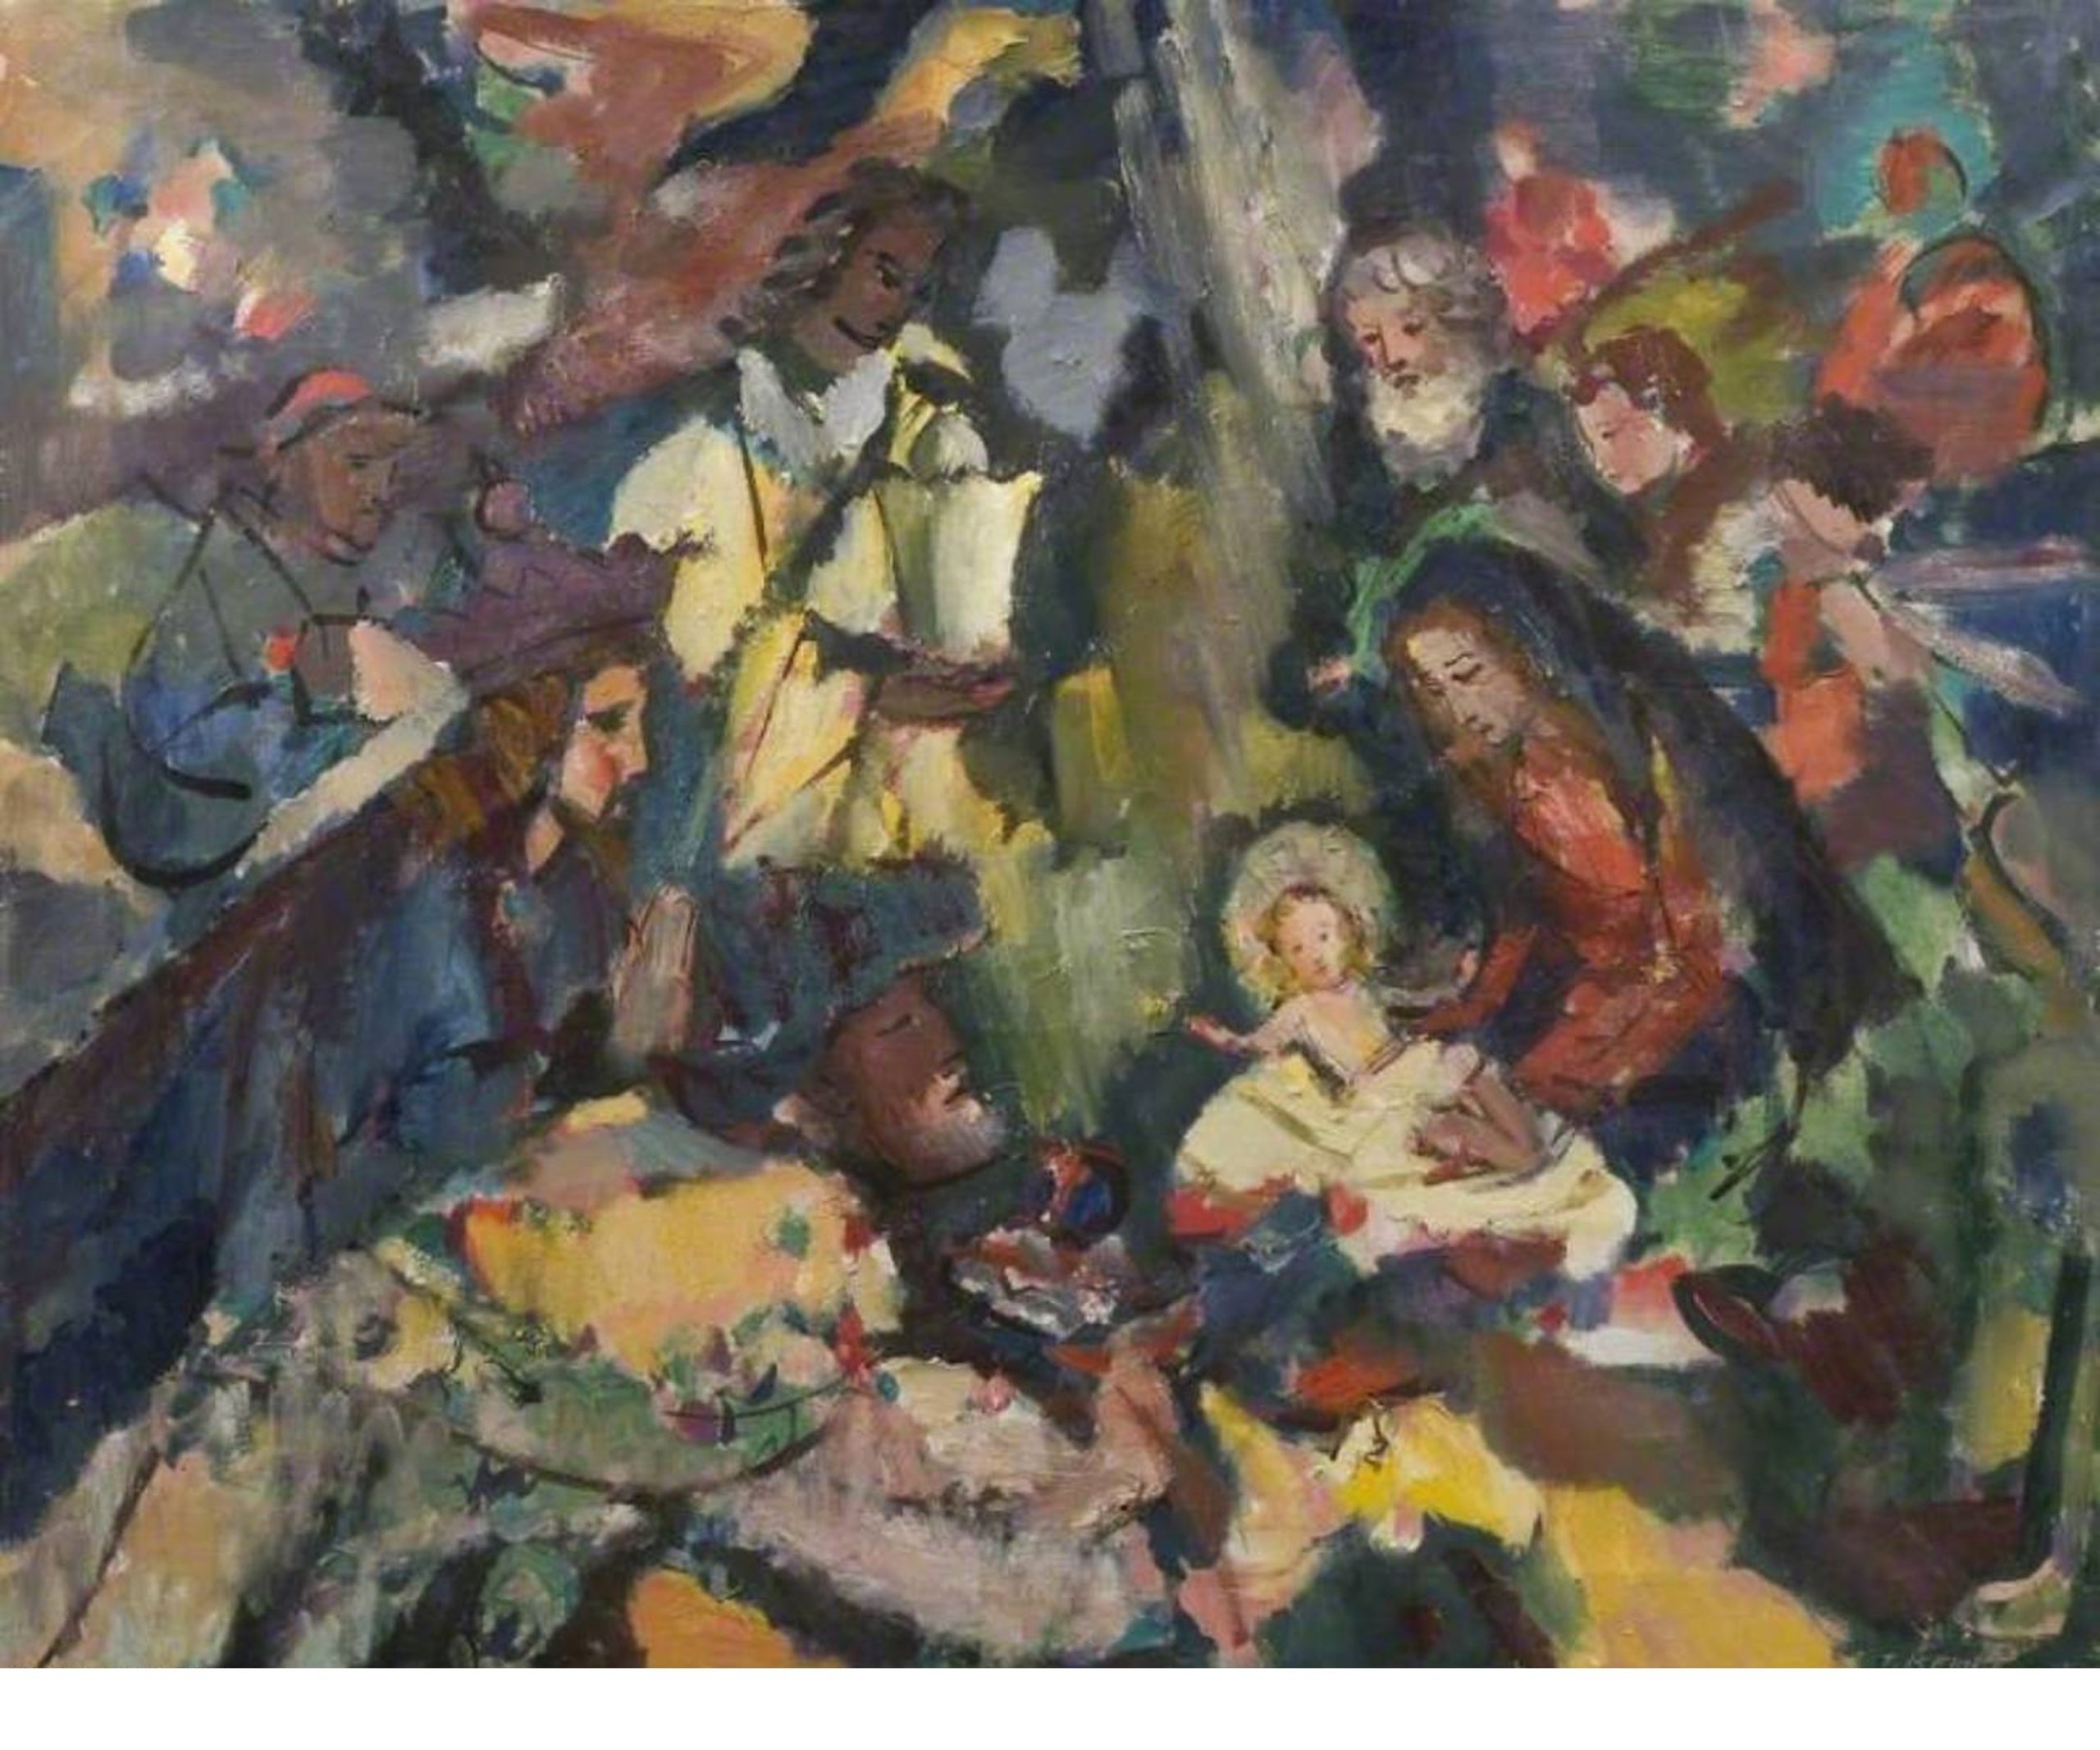 The Redemptive Story of Christmas